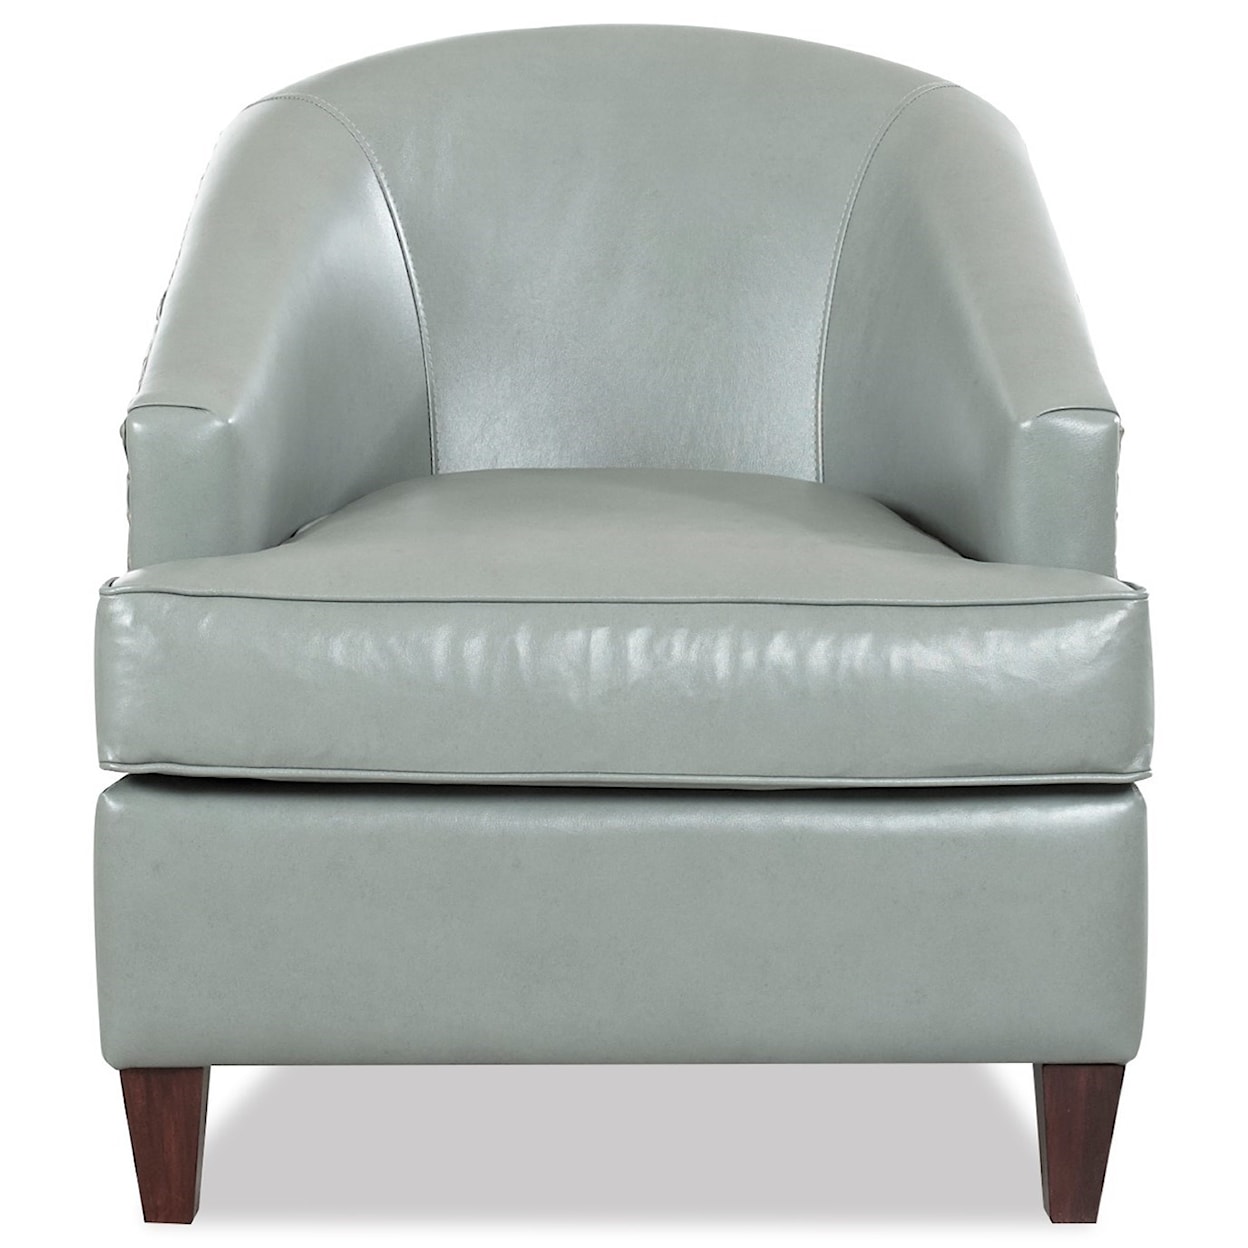 Klaussner Chairs and Accents Devon Chair